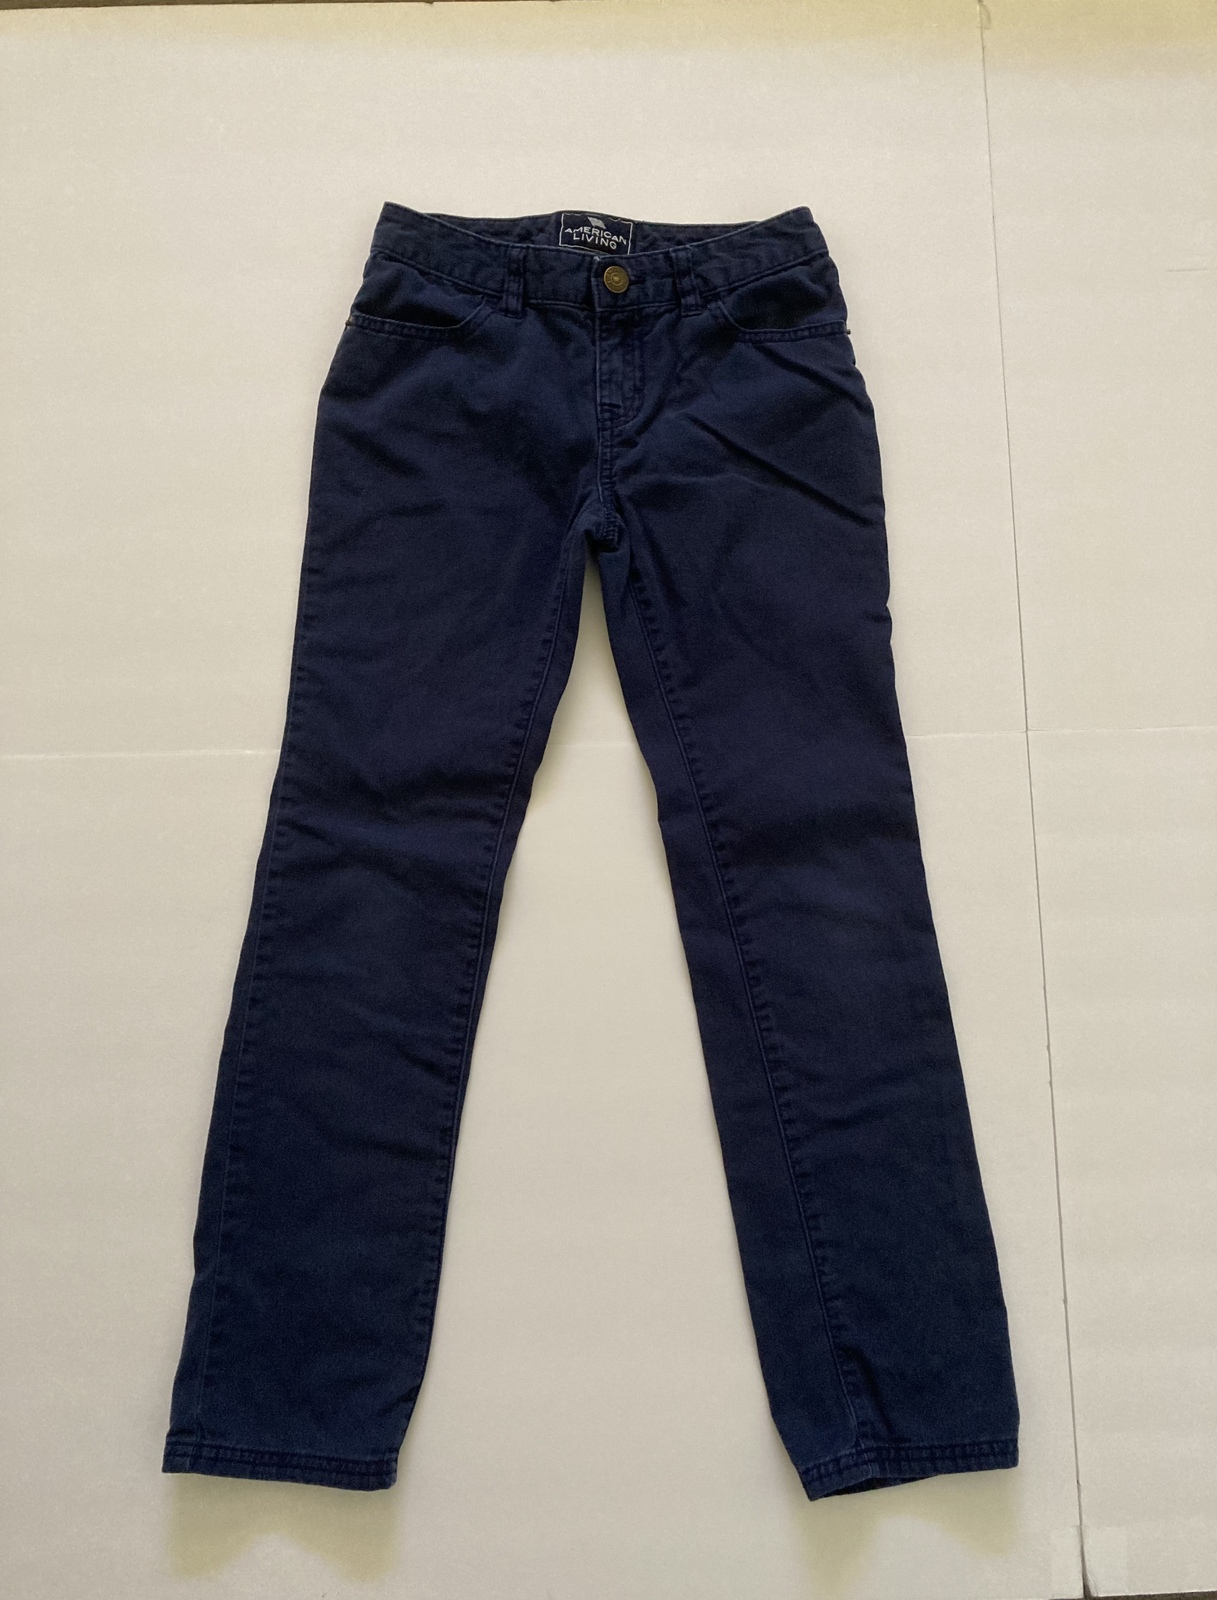 American Living Size 8 Pants for Kids - $10.00